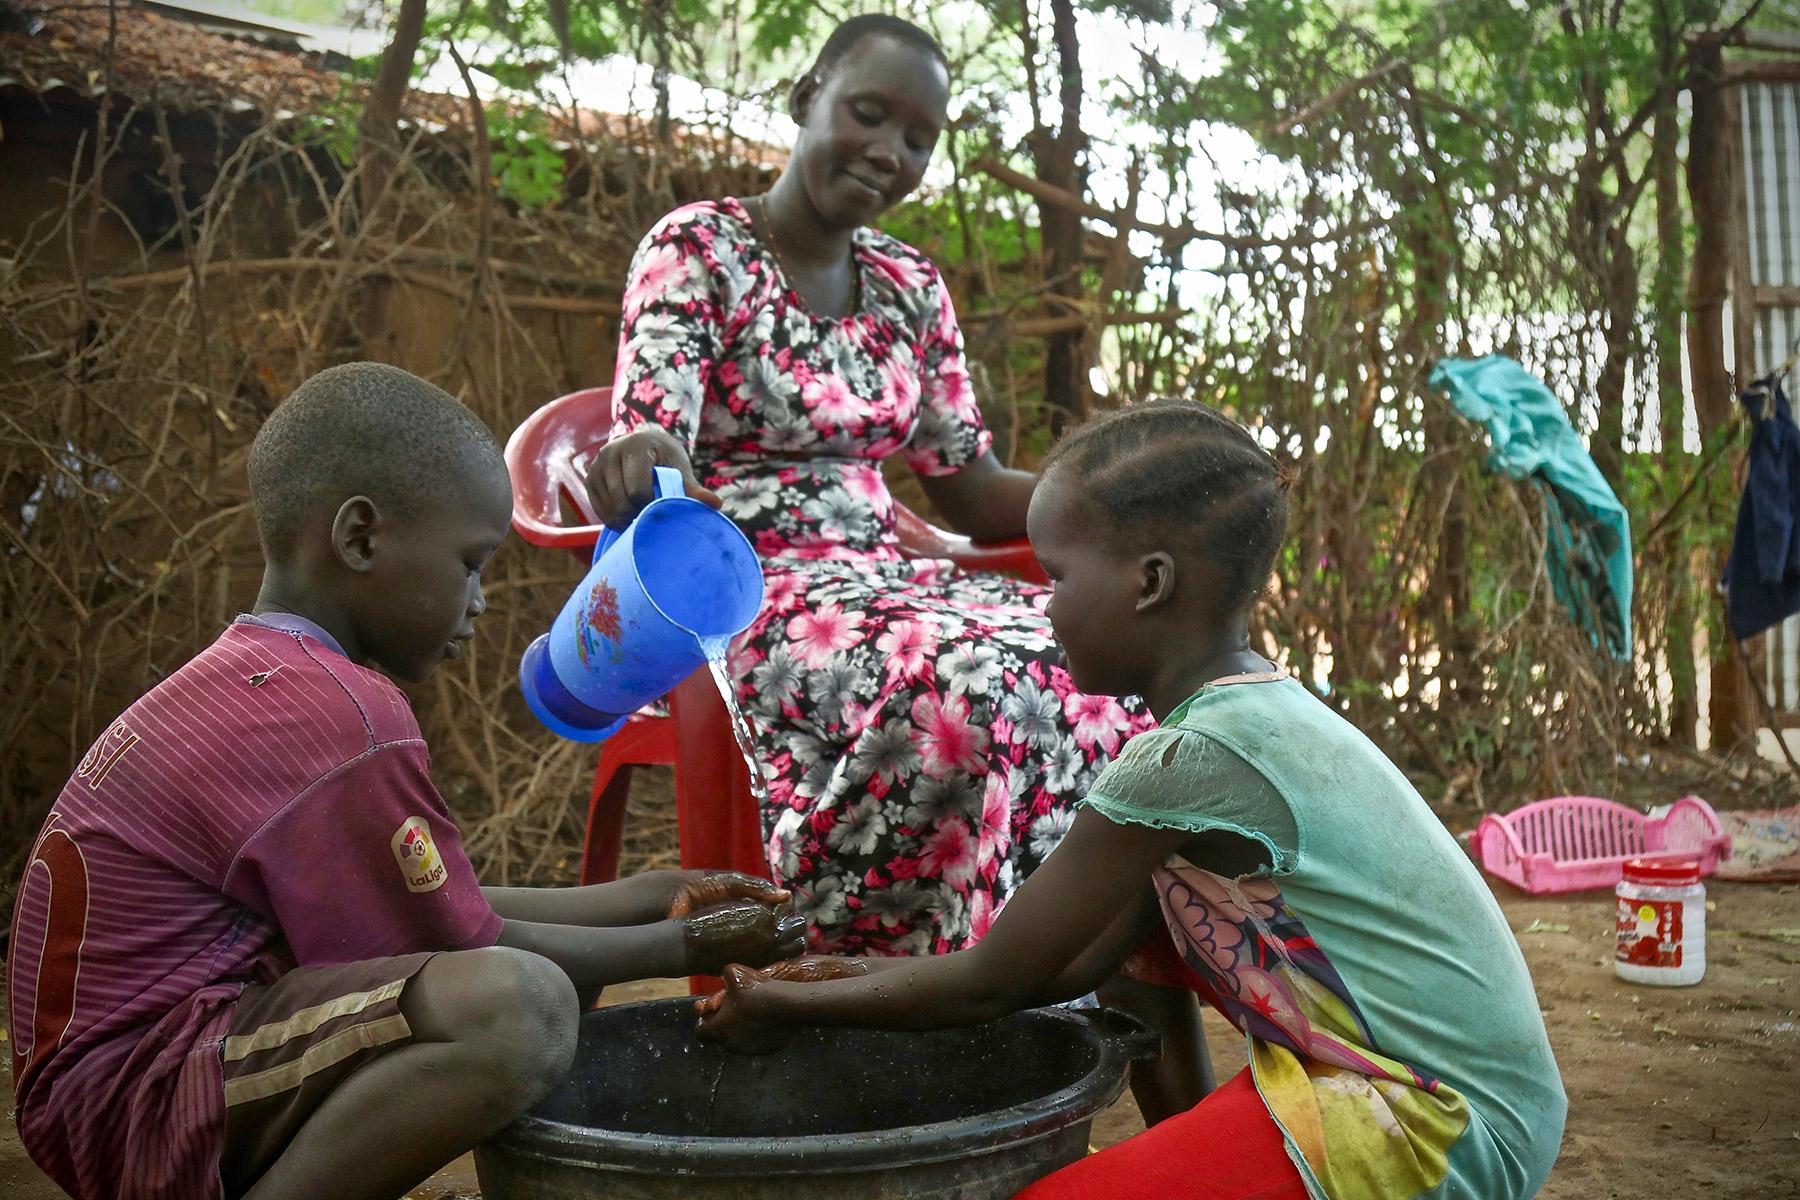 A woman washes her childrenâs hands in Kakuma refugee camp, Kenya. LWF has reinforced hygiene education to prevent a spread of COVID-19 in the camp. Photo: LWF/ P. Omagwa